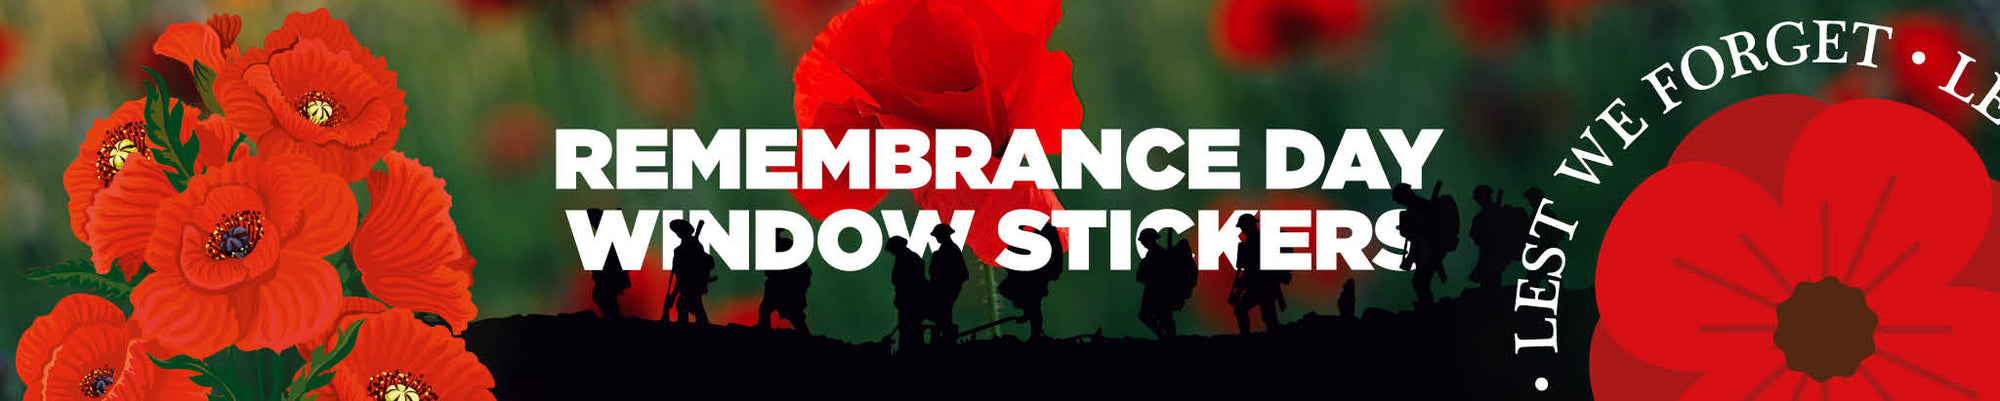 Remembrance Day Window Stickers for shop window displays